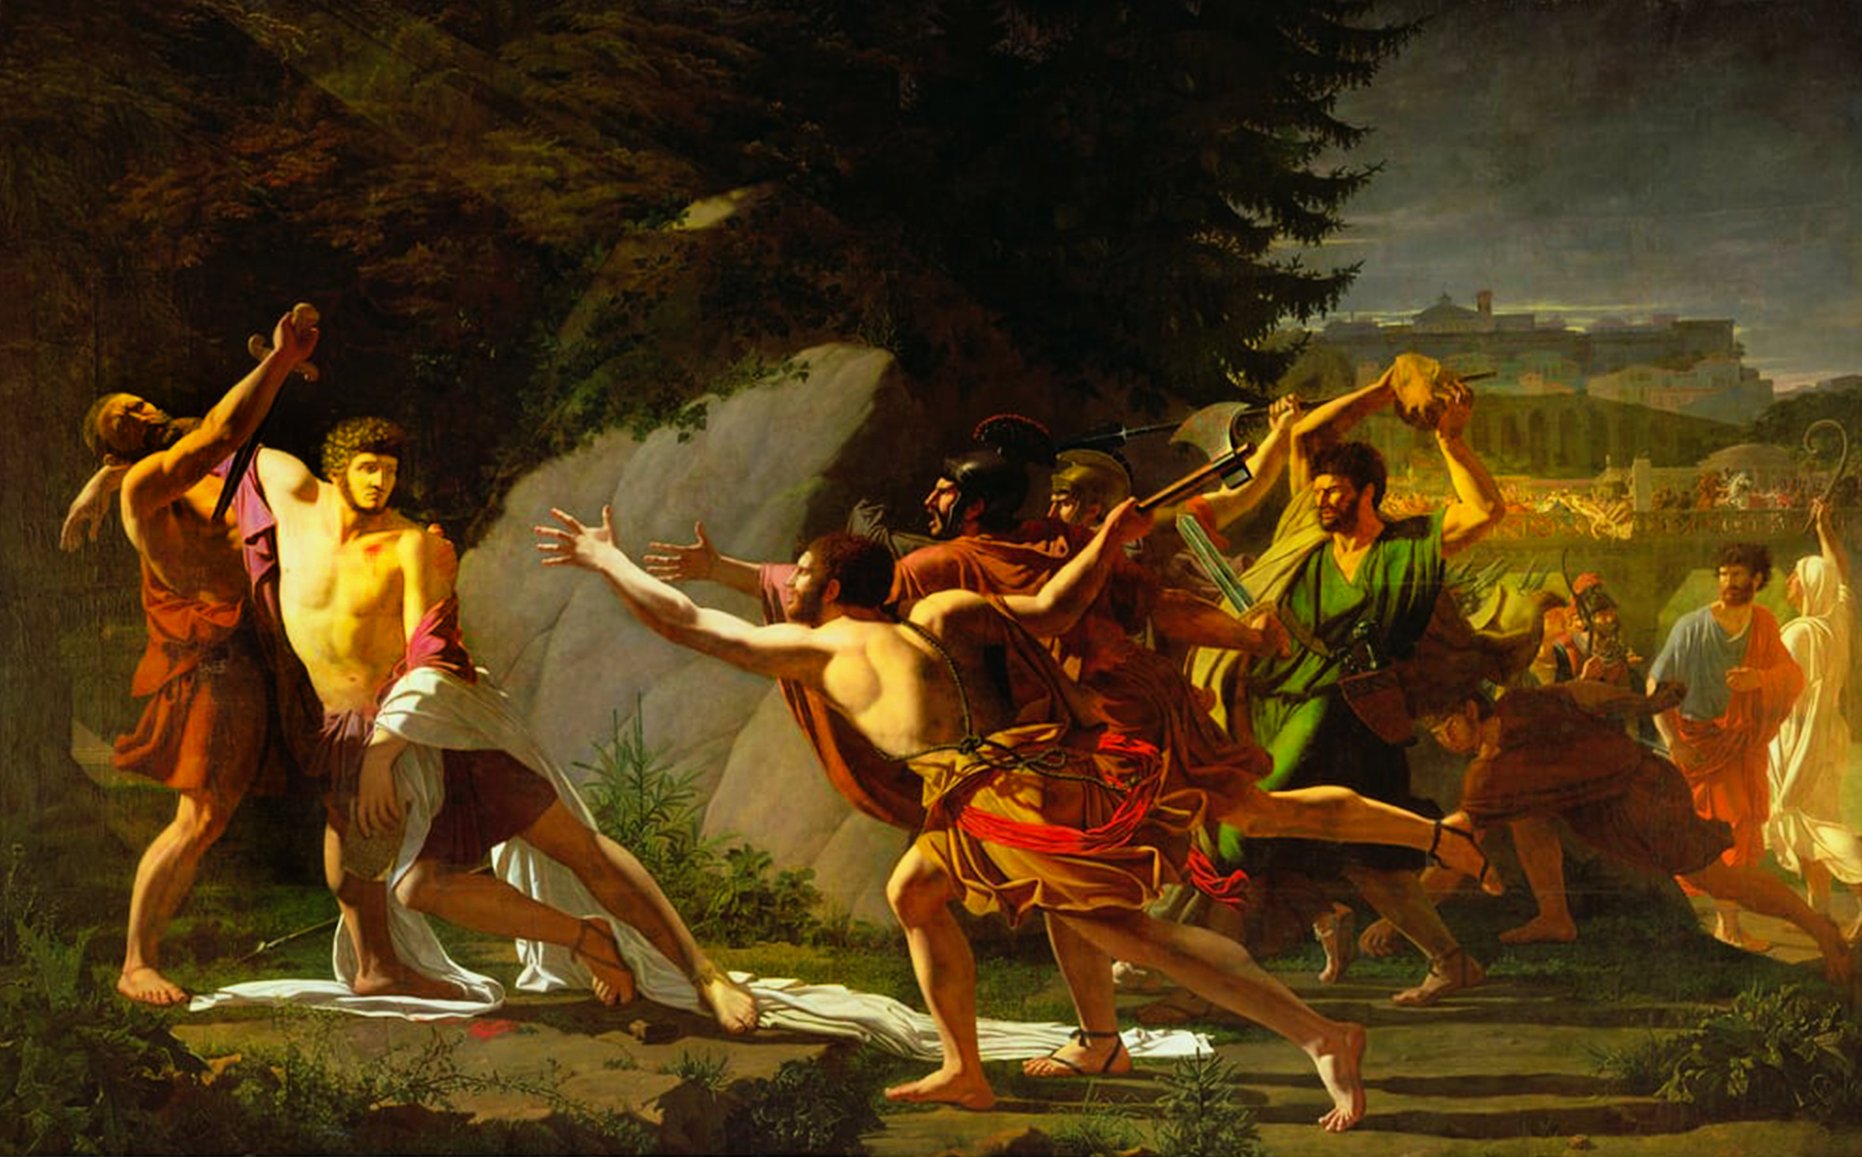 An image of a classical painting depicting a group of men in a battle scene in a garden with a rock formation and a building. The men are dressed in traditional Roman clothing and are armed with swords and rocks.